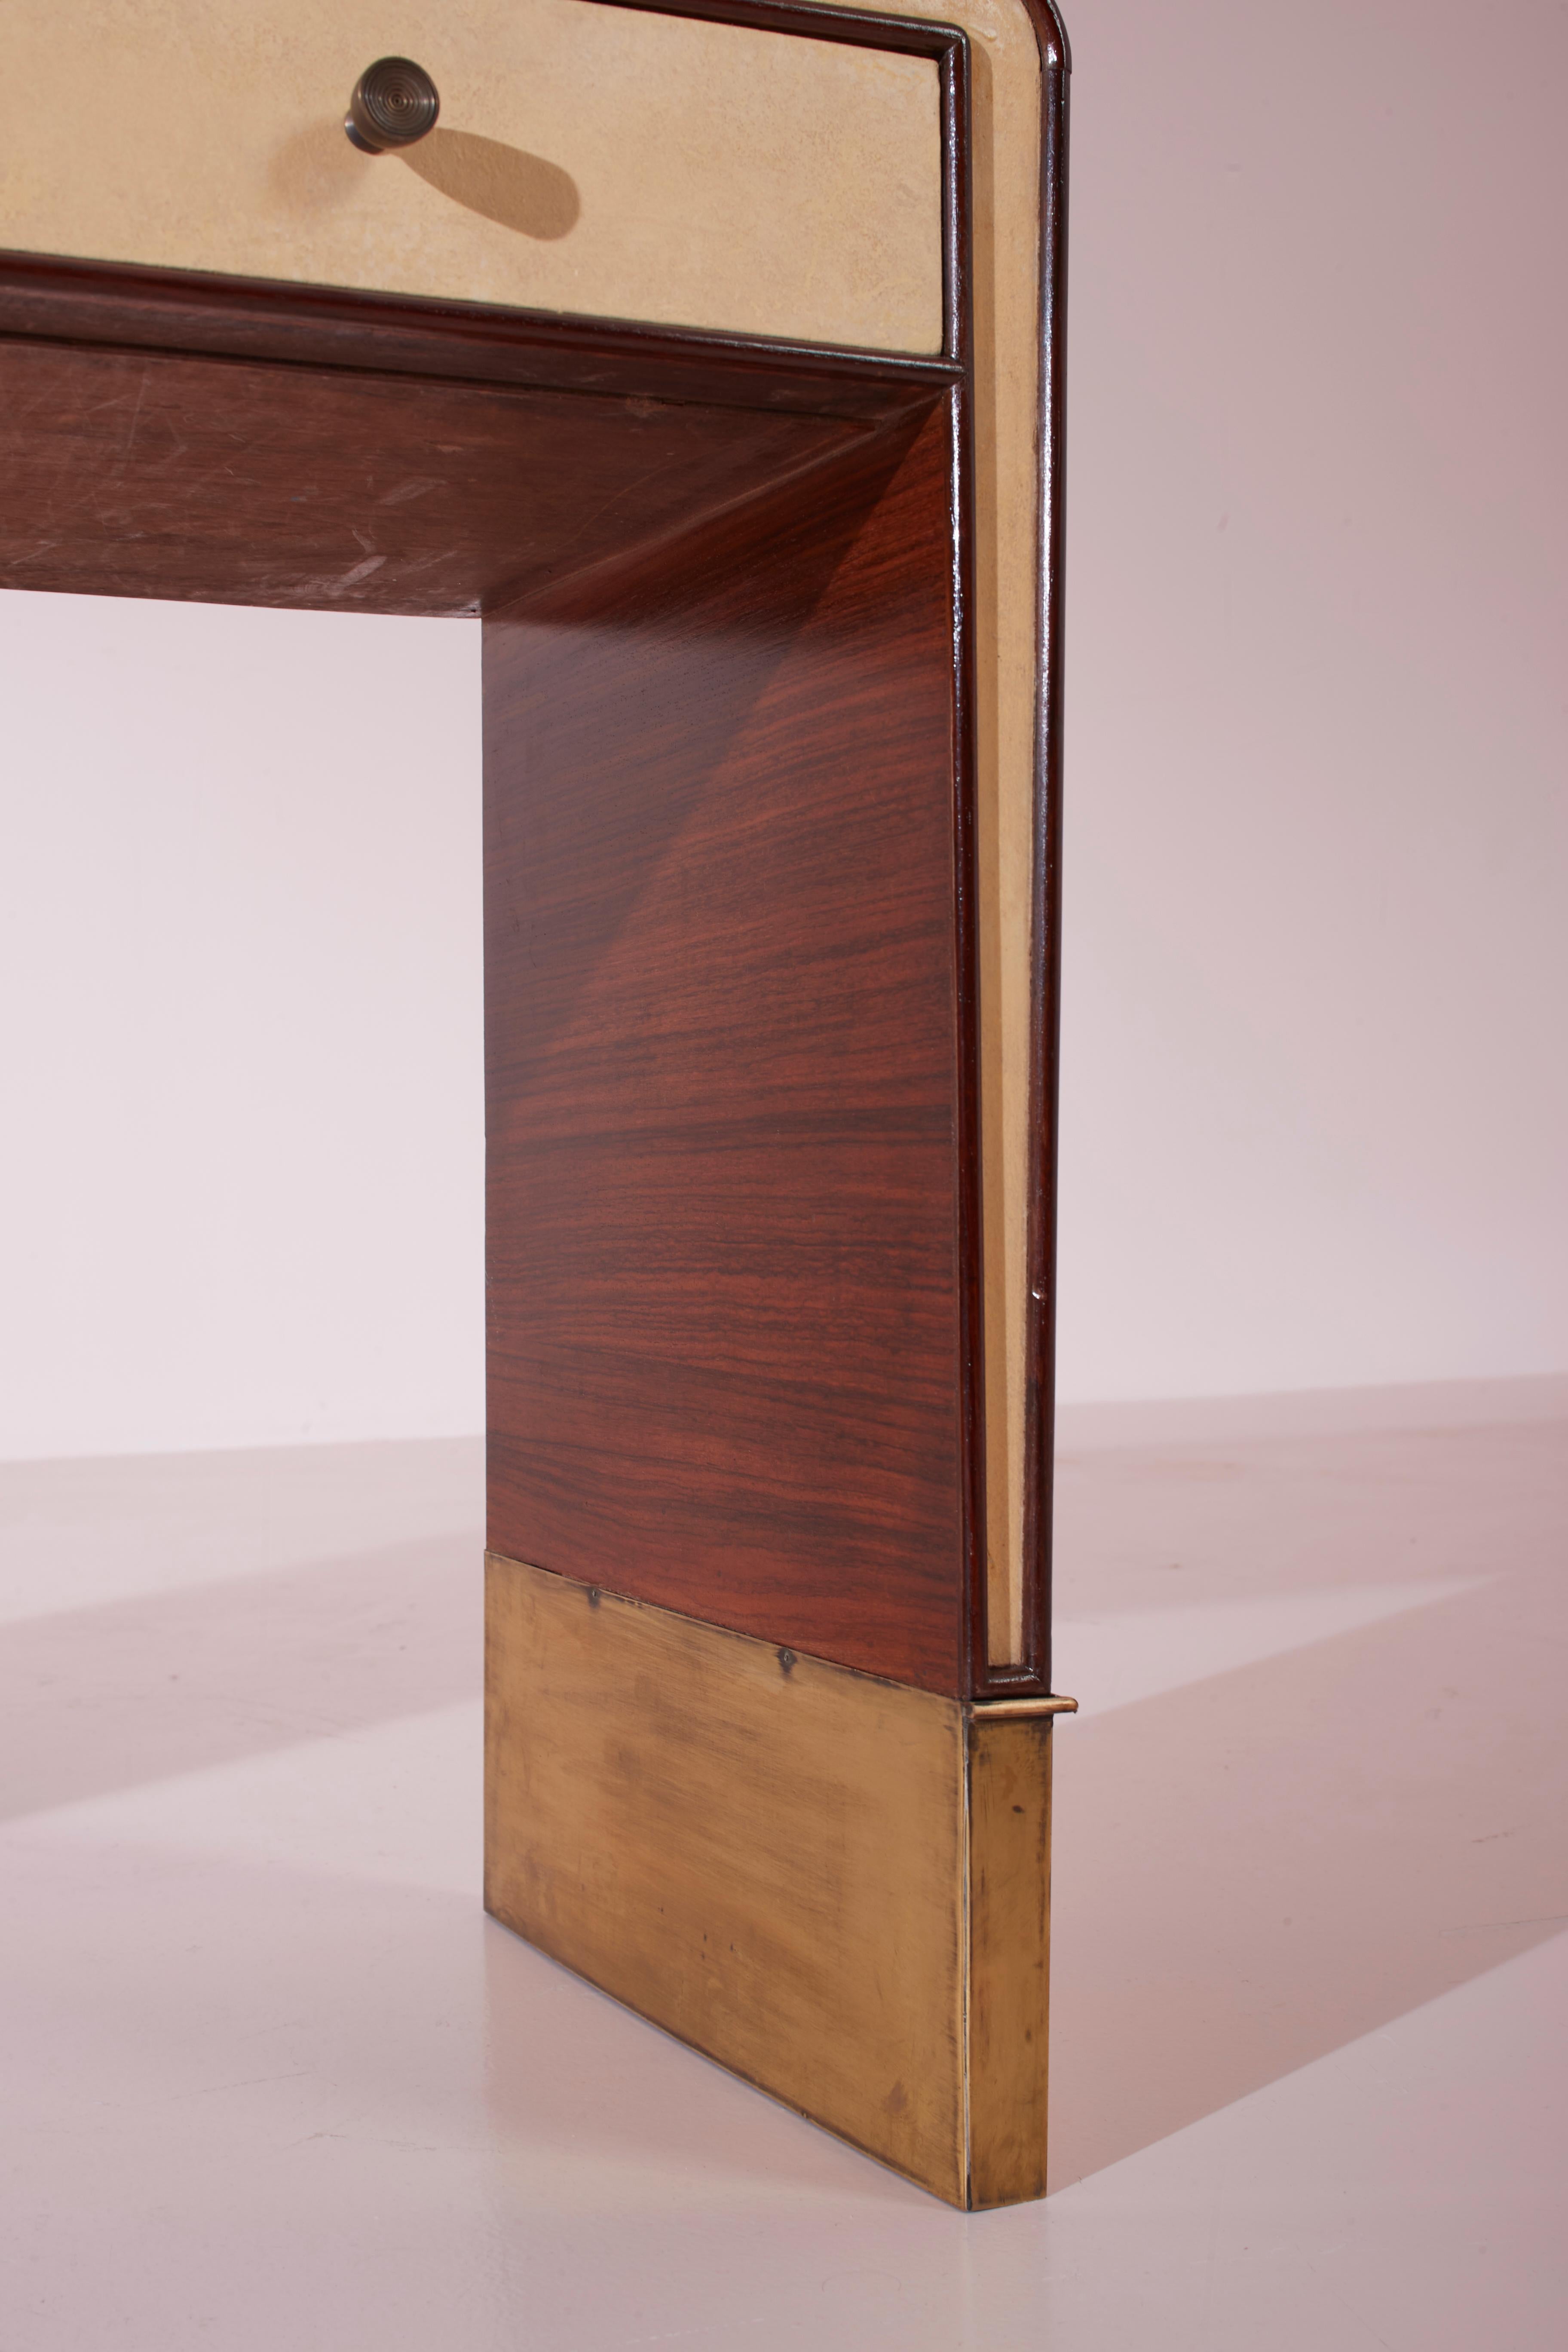 Gio Ponti walnut, parchment, and brass console or dressing table, Italy, 1930s For Sale 3